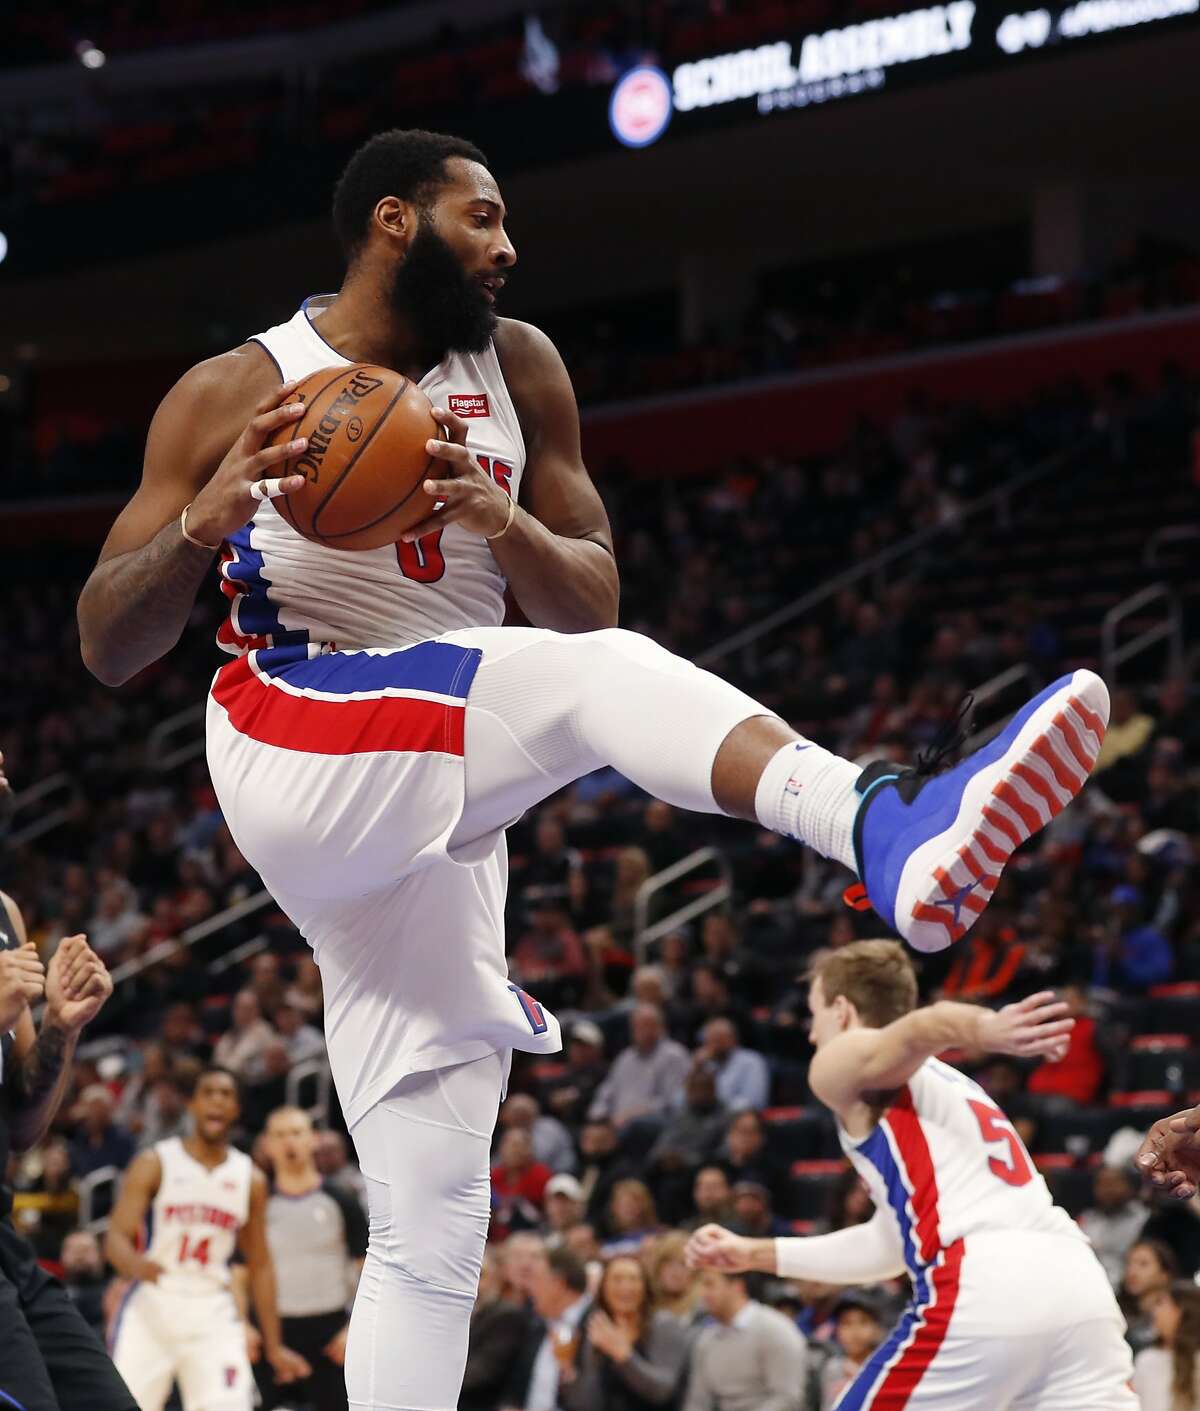 Detroit Pistons center Andre Drummond grabs a rebound during the second half of an NBA basketball game against the Orlando Magic, Wednesday, Jan. 16, 2019, in Detroit. (AP Photo/Carlos Osorio)